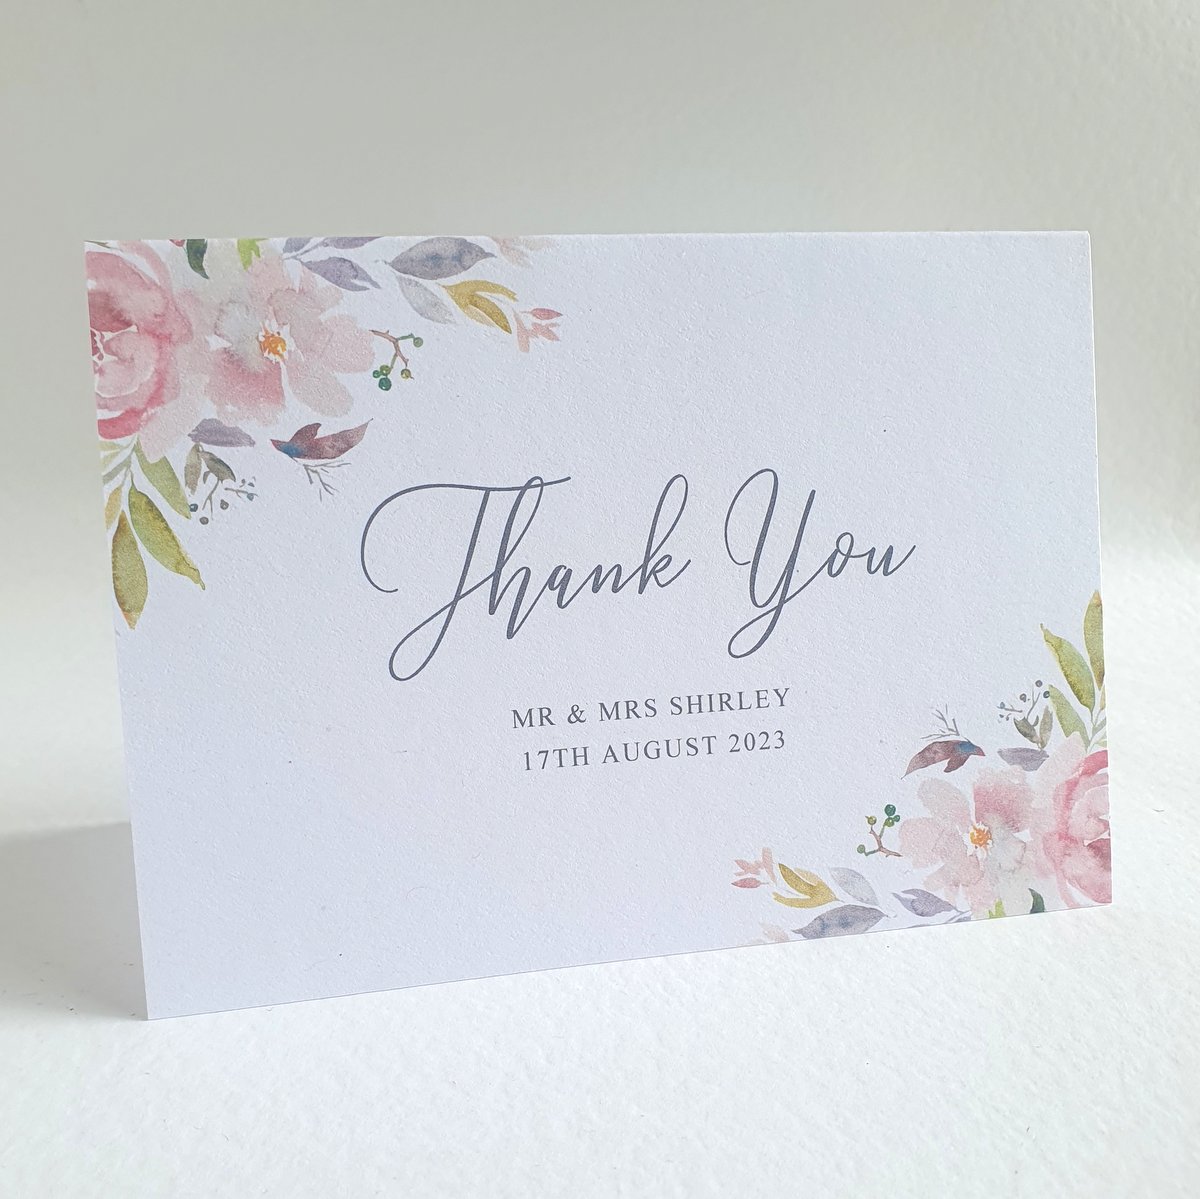 a personalised wedding thank you card with mauve floral accents to the corners